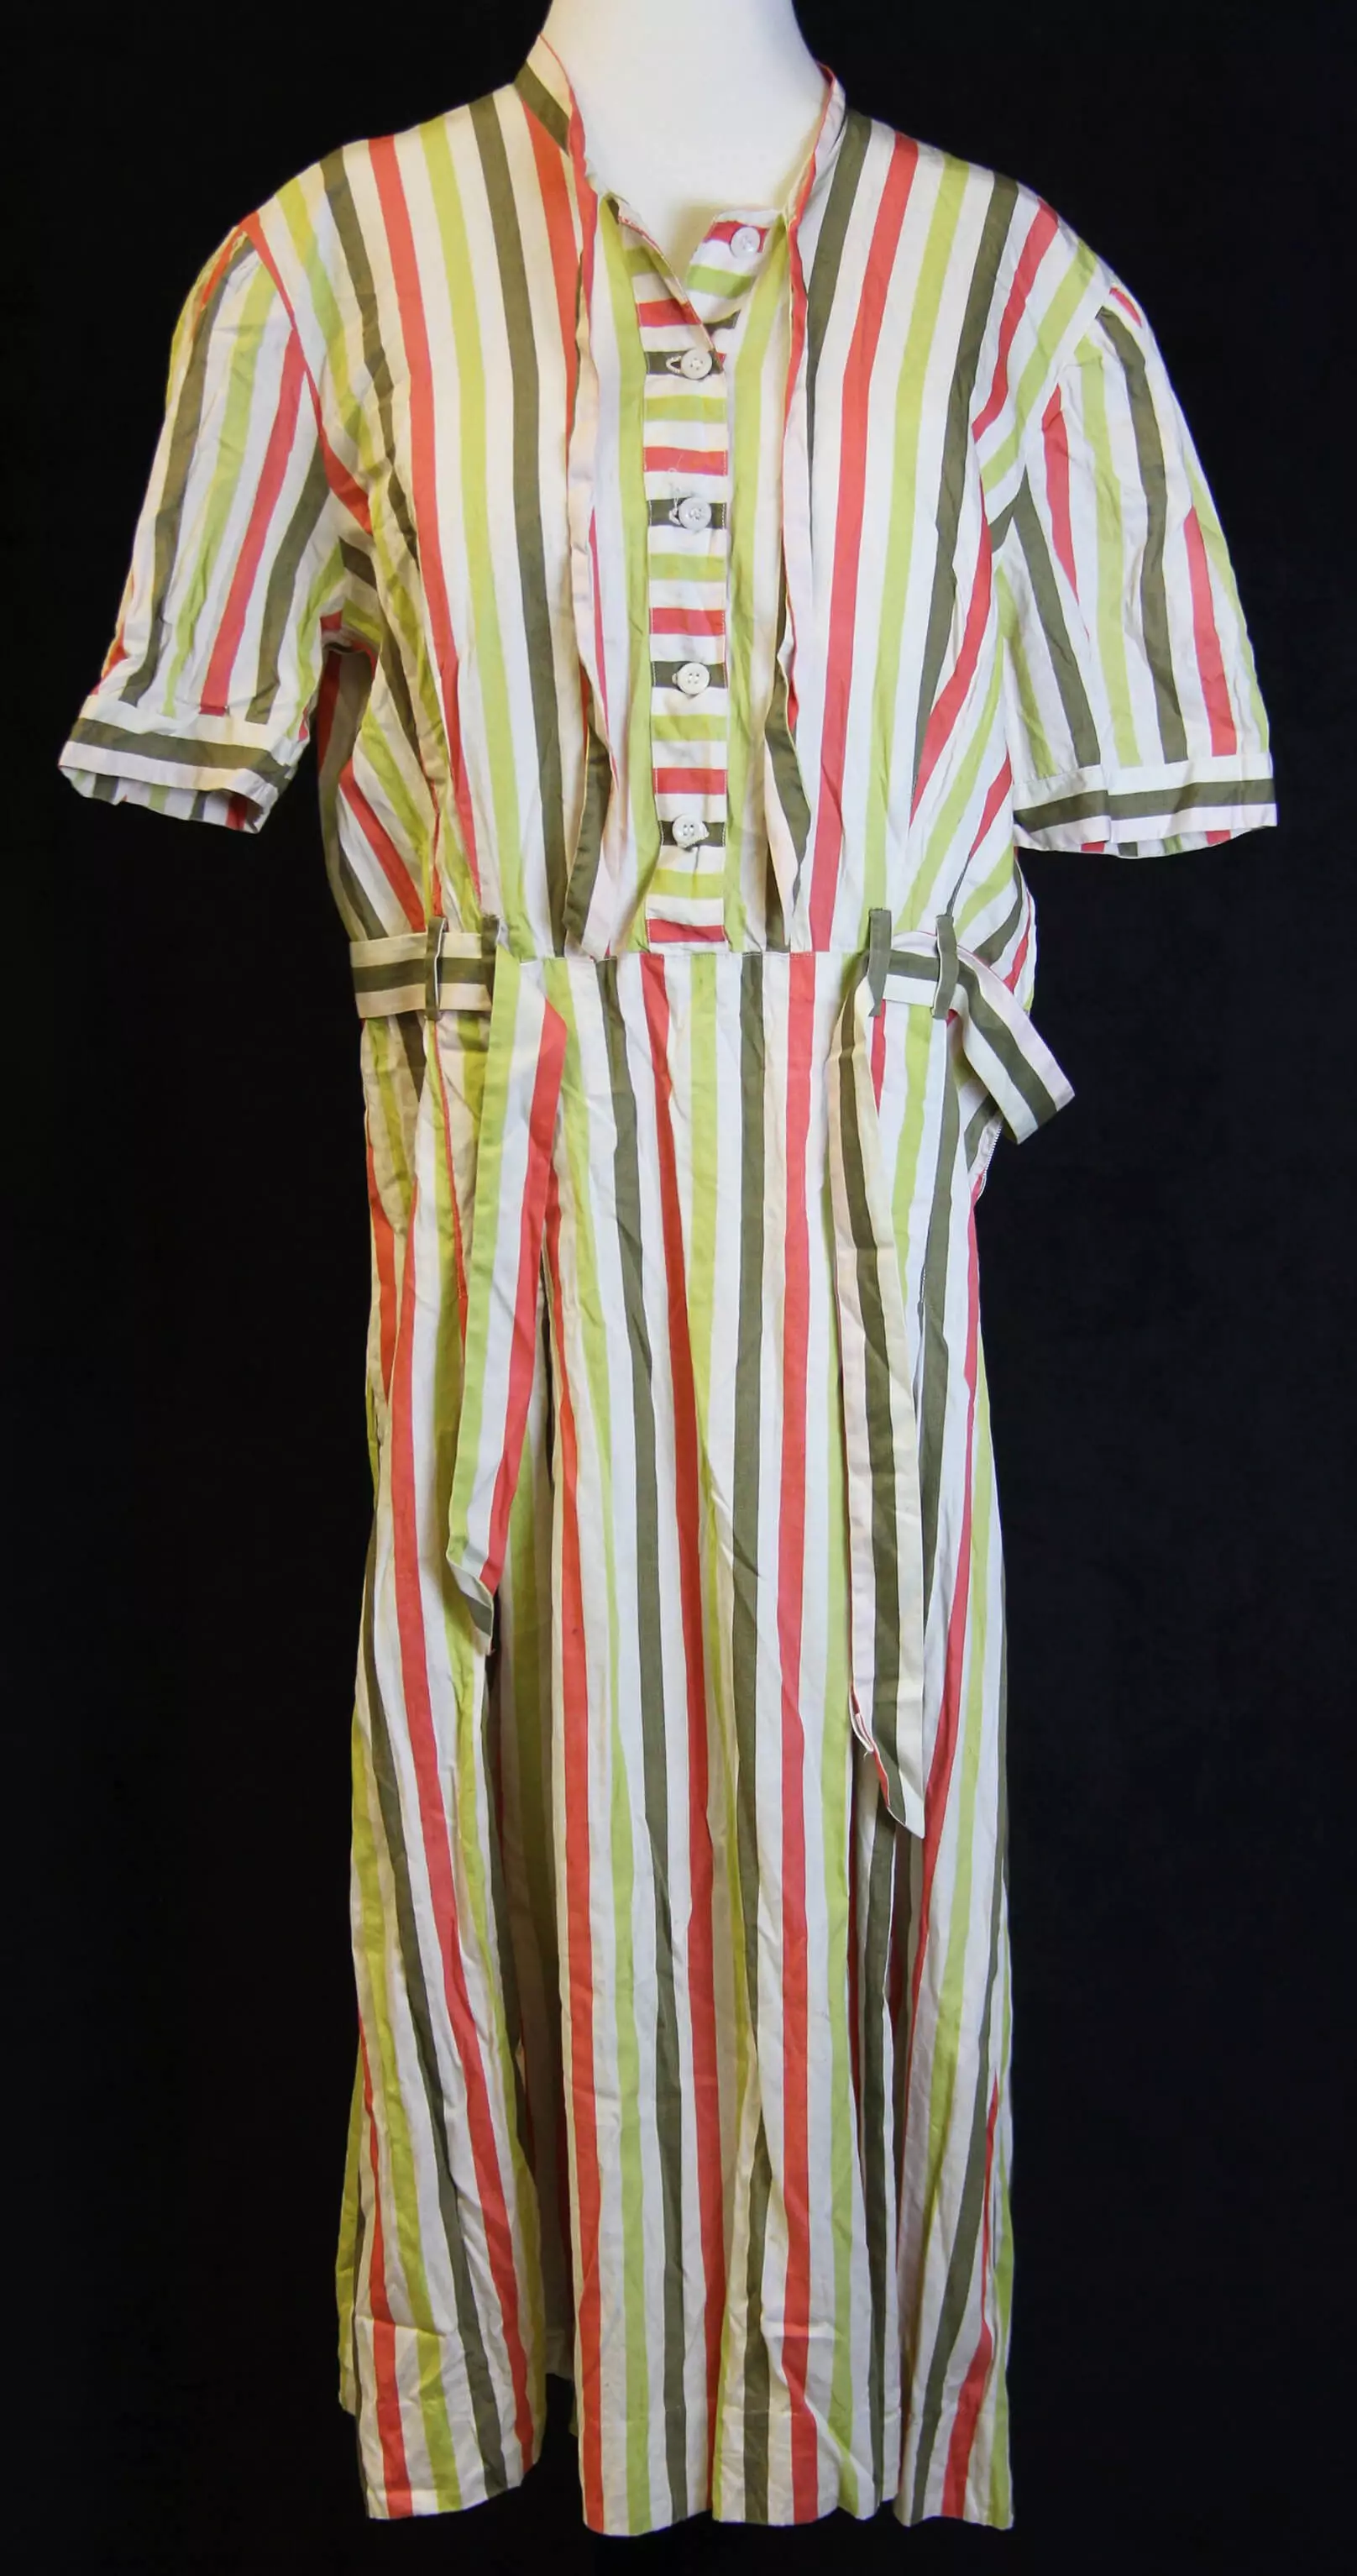 Color photo of a dress on a mannequin.  The dress has white, light green, orange, and dark green vertical stripes of equal width. The dress has 5 buttons above the waist, a built in belt of the same material around the waist, and short sleeves.